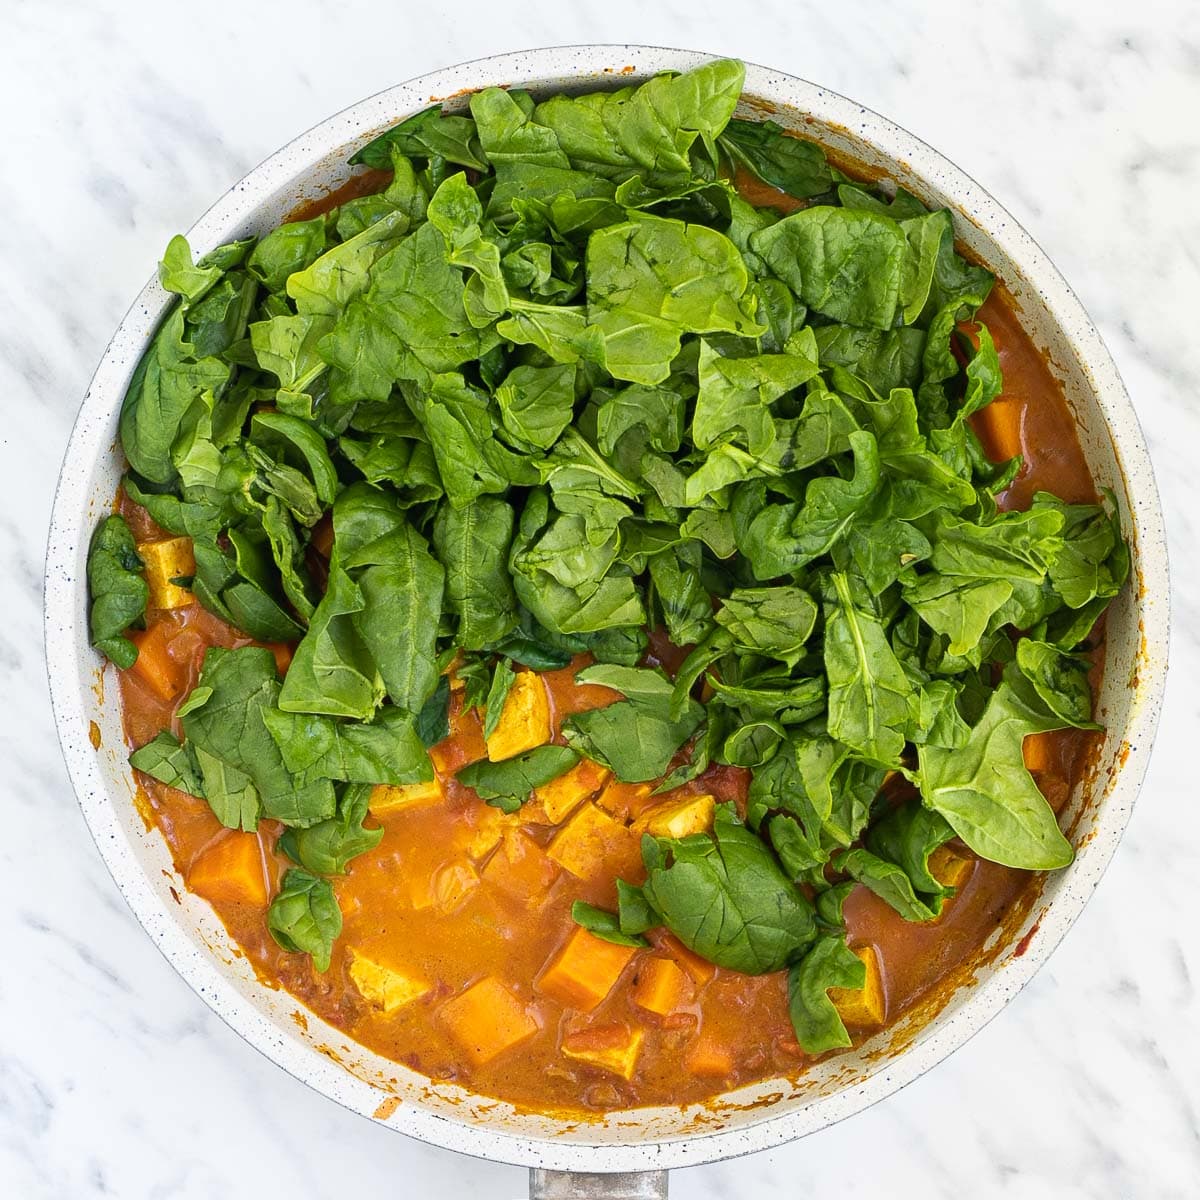 Chopped orange sweet potatoes and tofu cubes in an orange thick sauce. Fresh chopped spinach leaves are on top.